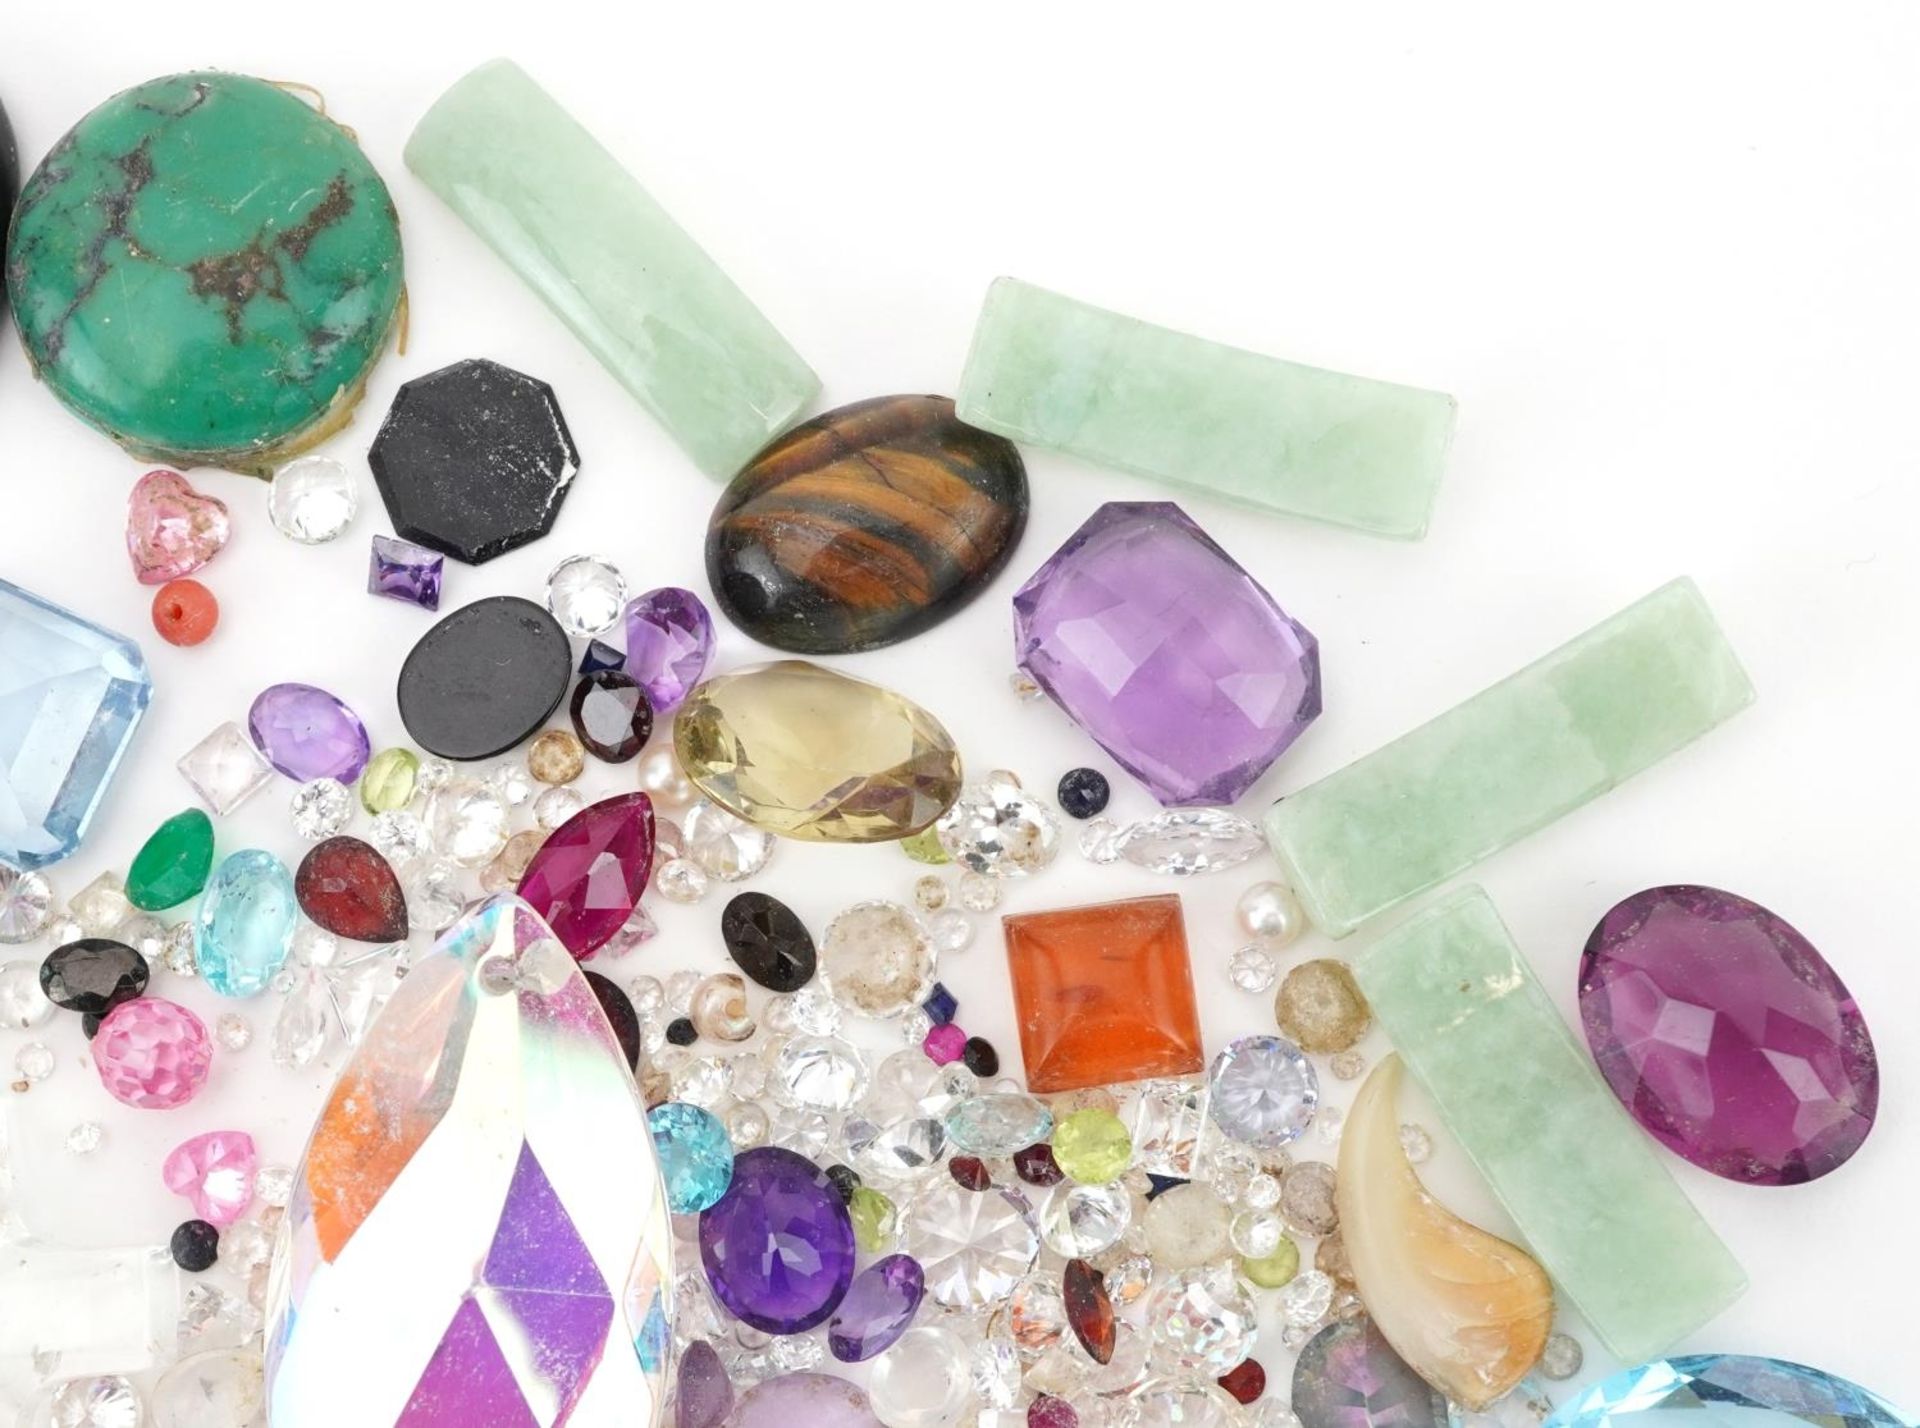 Large collection of loose semi precious gemstones and cameos including sapphires, amethyst, topaz, - Image 3 of 5